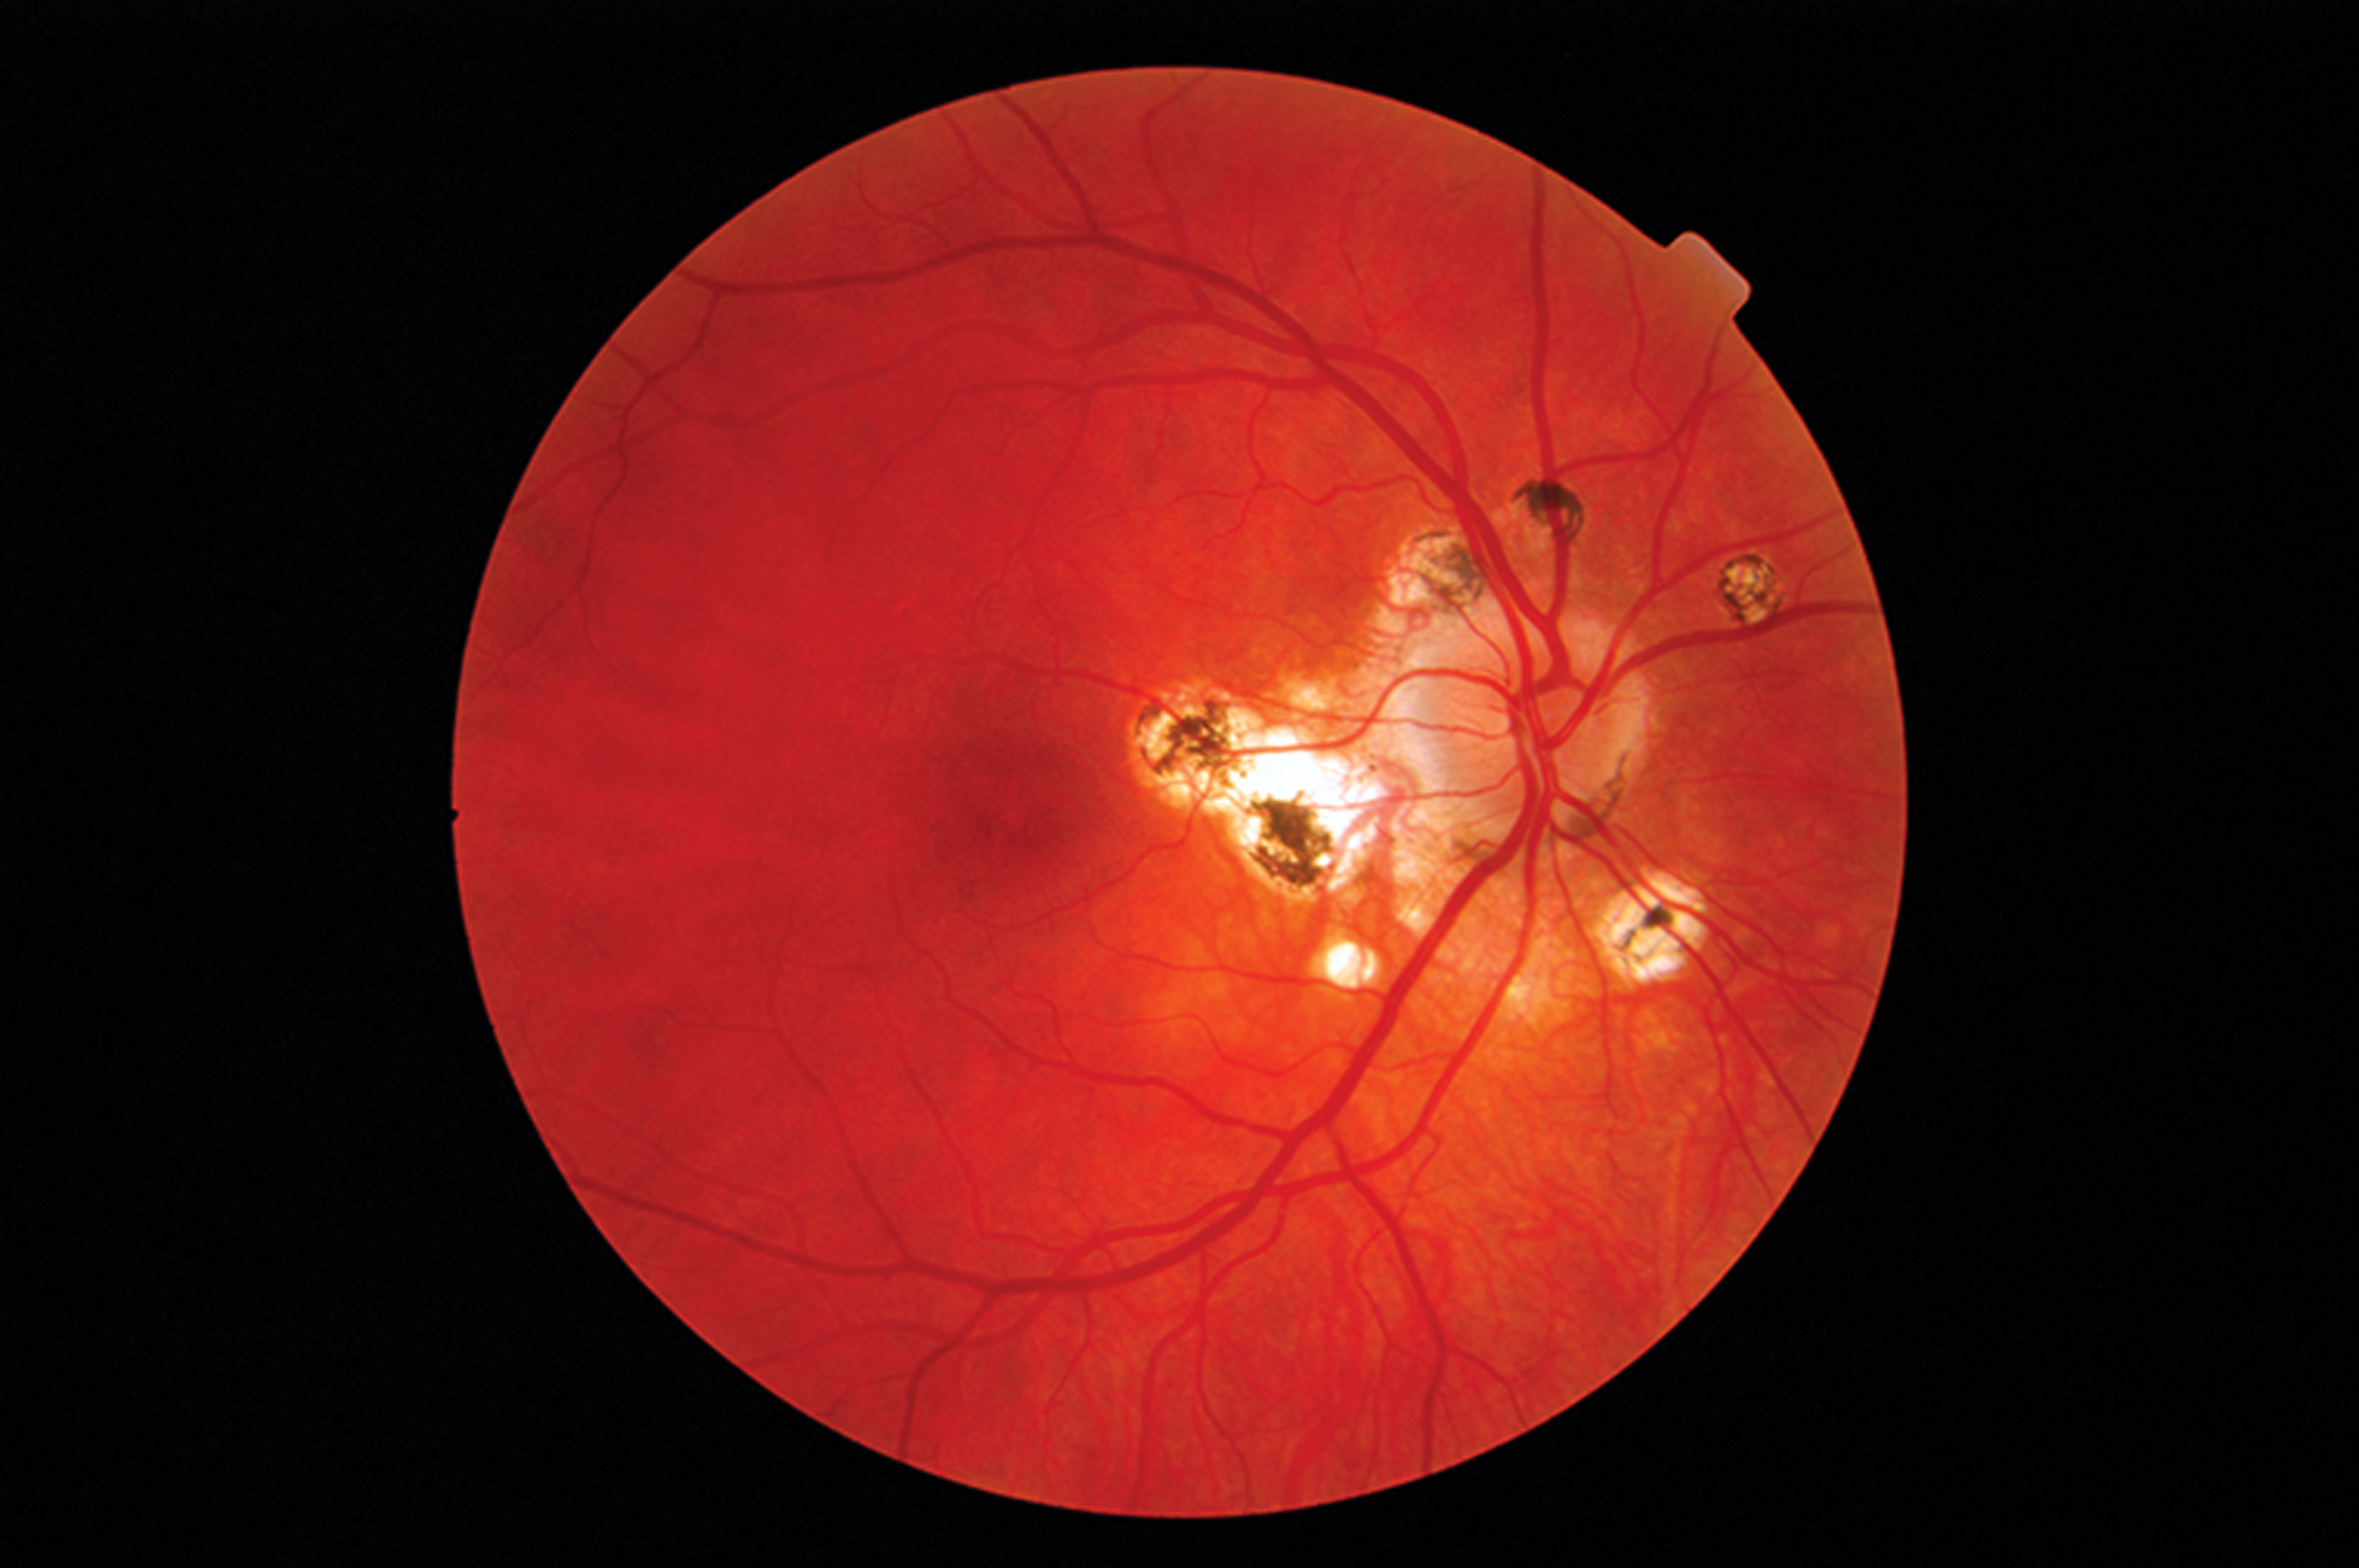 2007-2008 Patients with an inherited retinal disease called Leber’s congenital amaurosis appear to have improved vision after treatment with a gene therapy. However, years later, researchers will report in the <i>New England Journal of Medicine</i> that some patients’ eyesight has begun to wane.